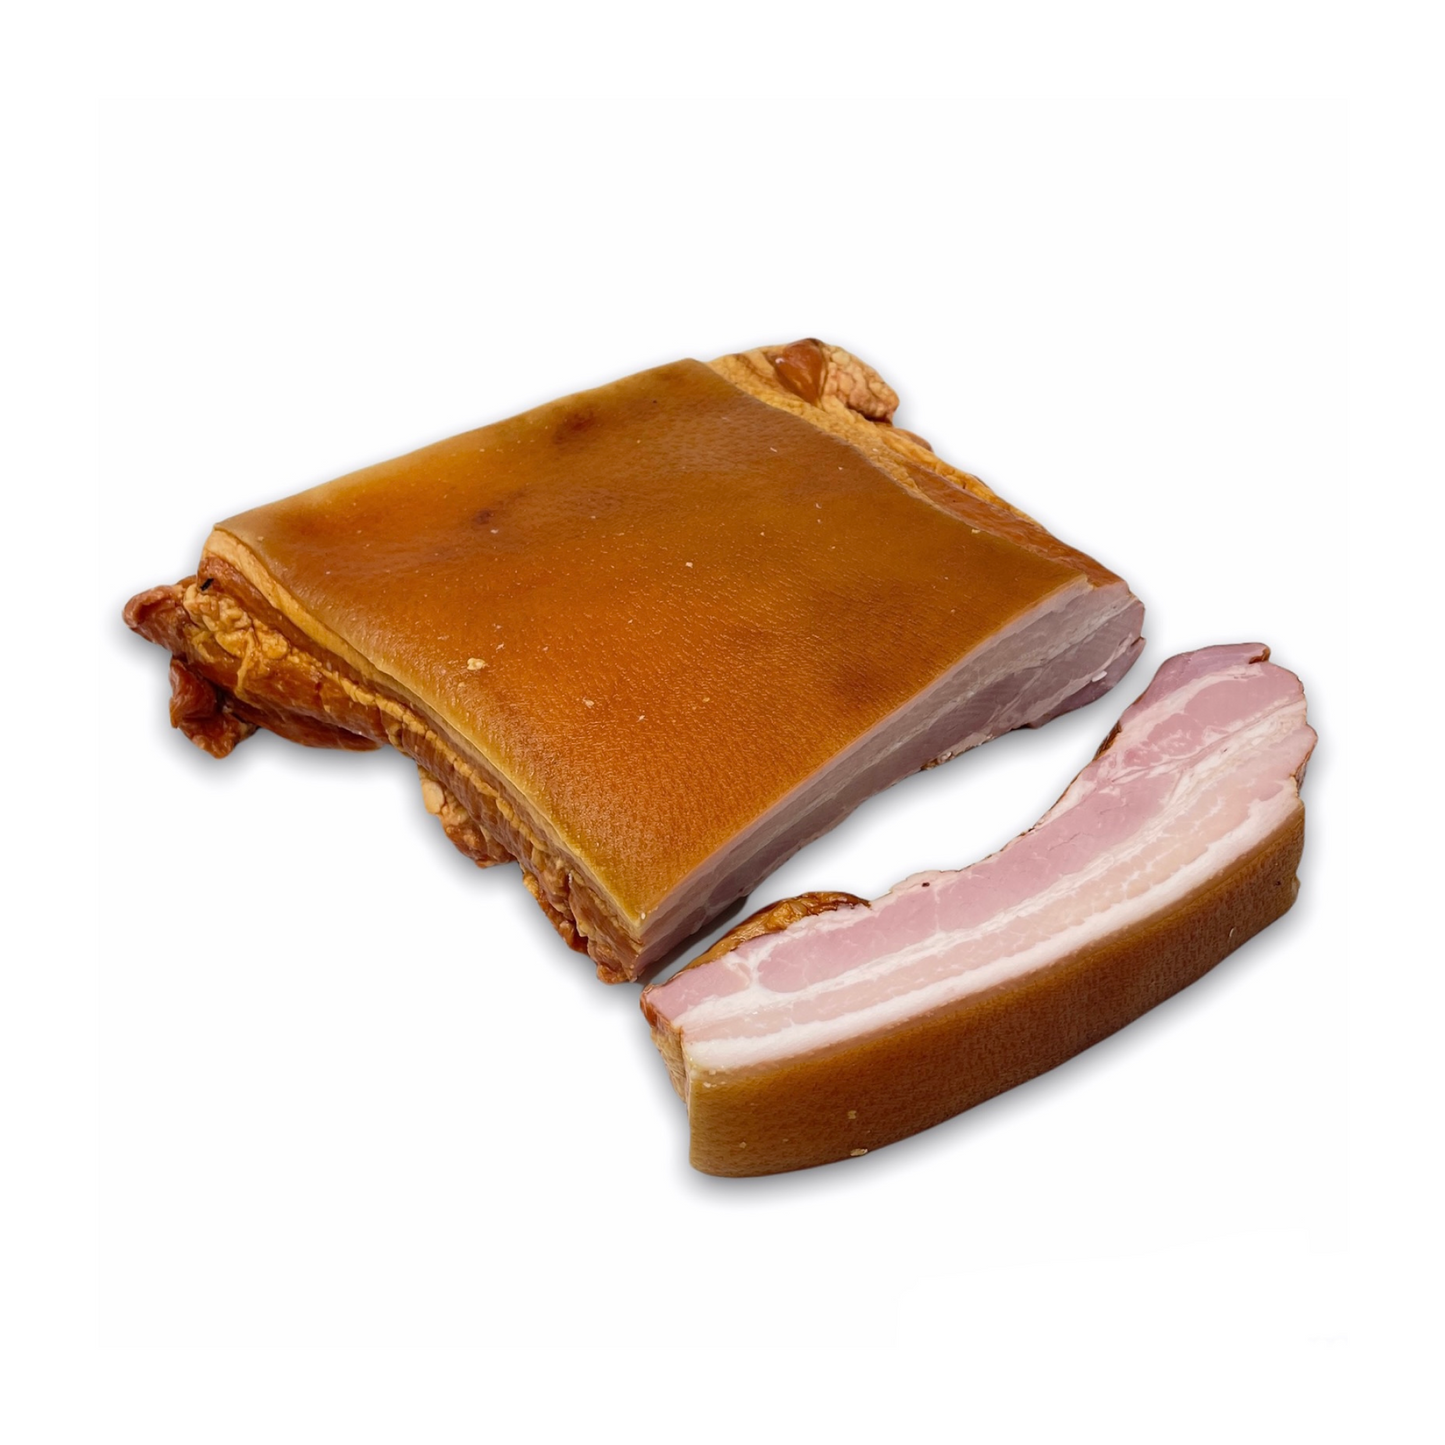 Applewood Smoked Bacon (Fully Cooked) 500g